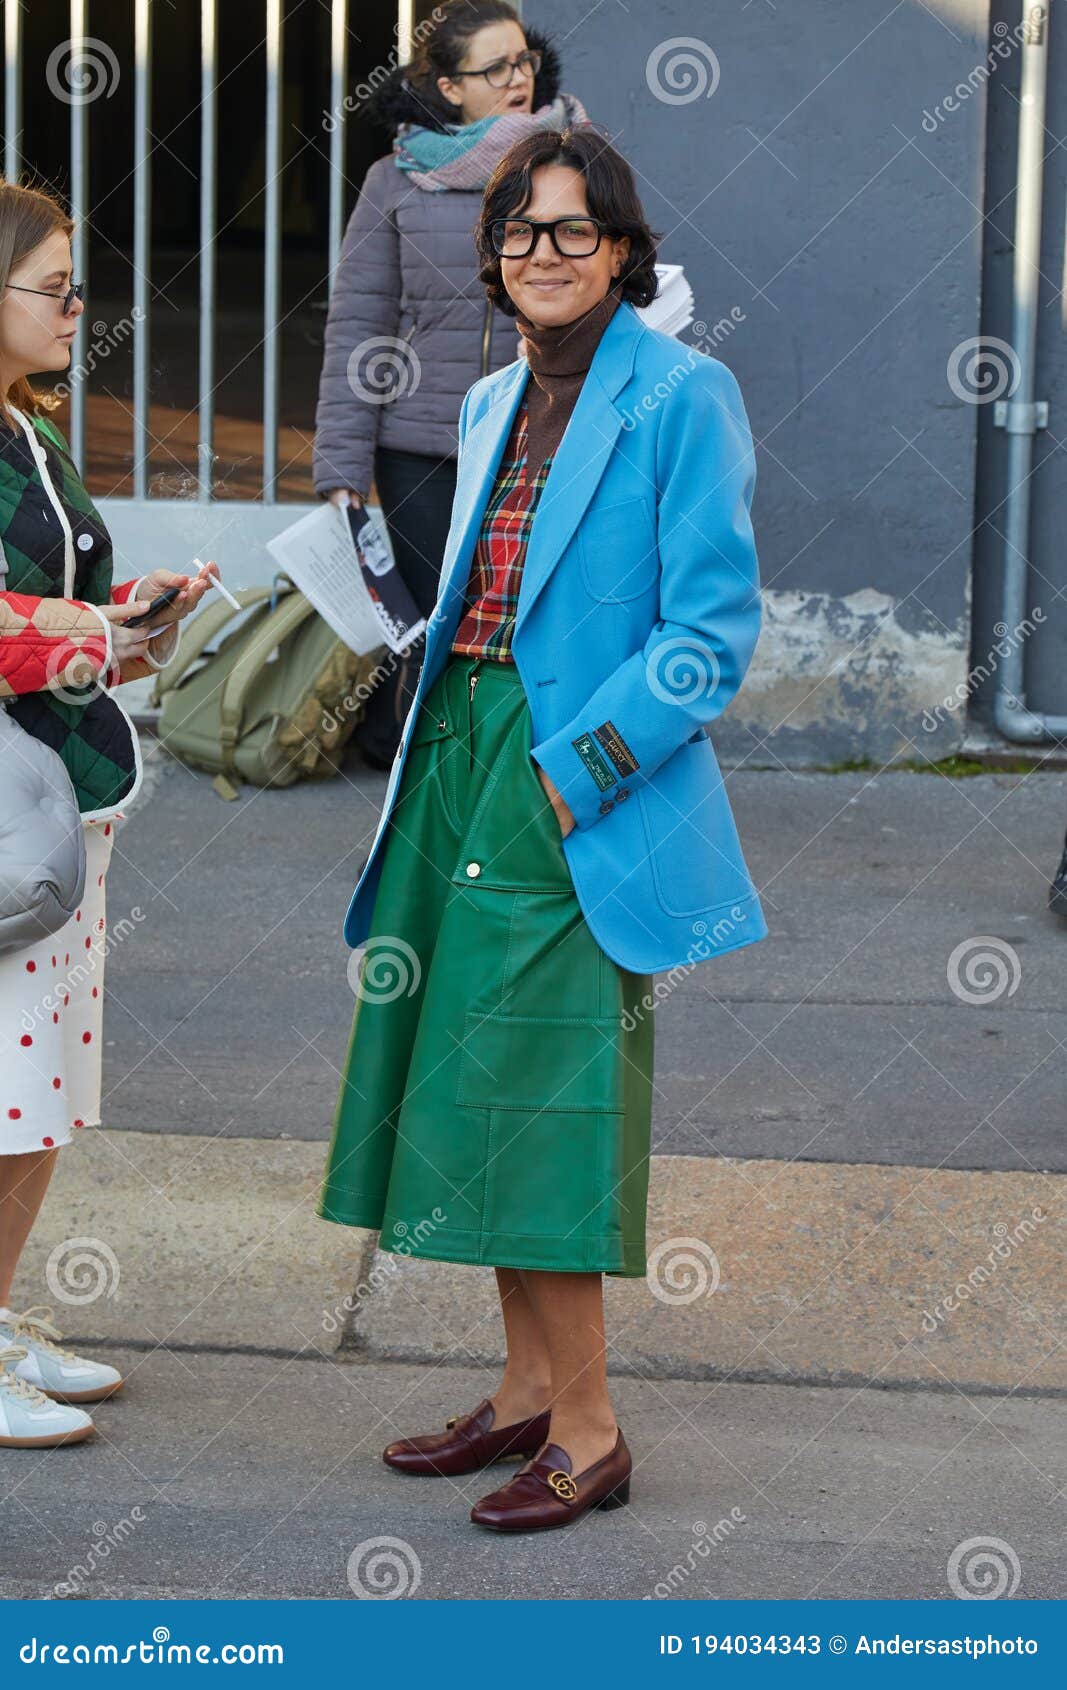 Woman with Blue Gucci Jacket and Green Leather Skirt Marni Fashion Milan Fashion Editorial Stock Photo - Image of editorial, 194034343